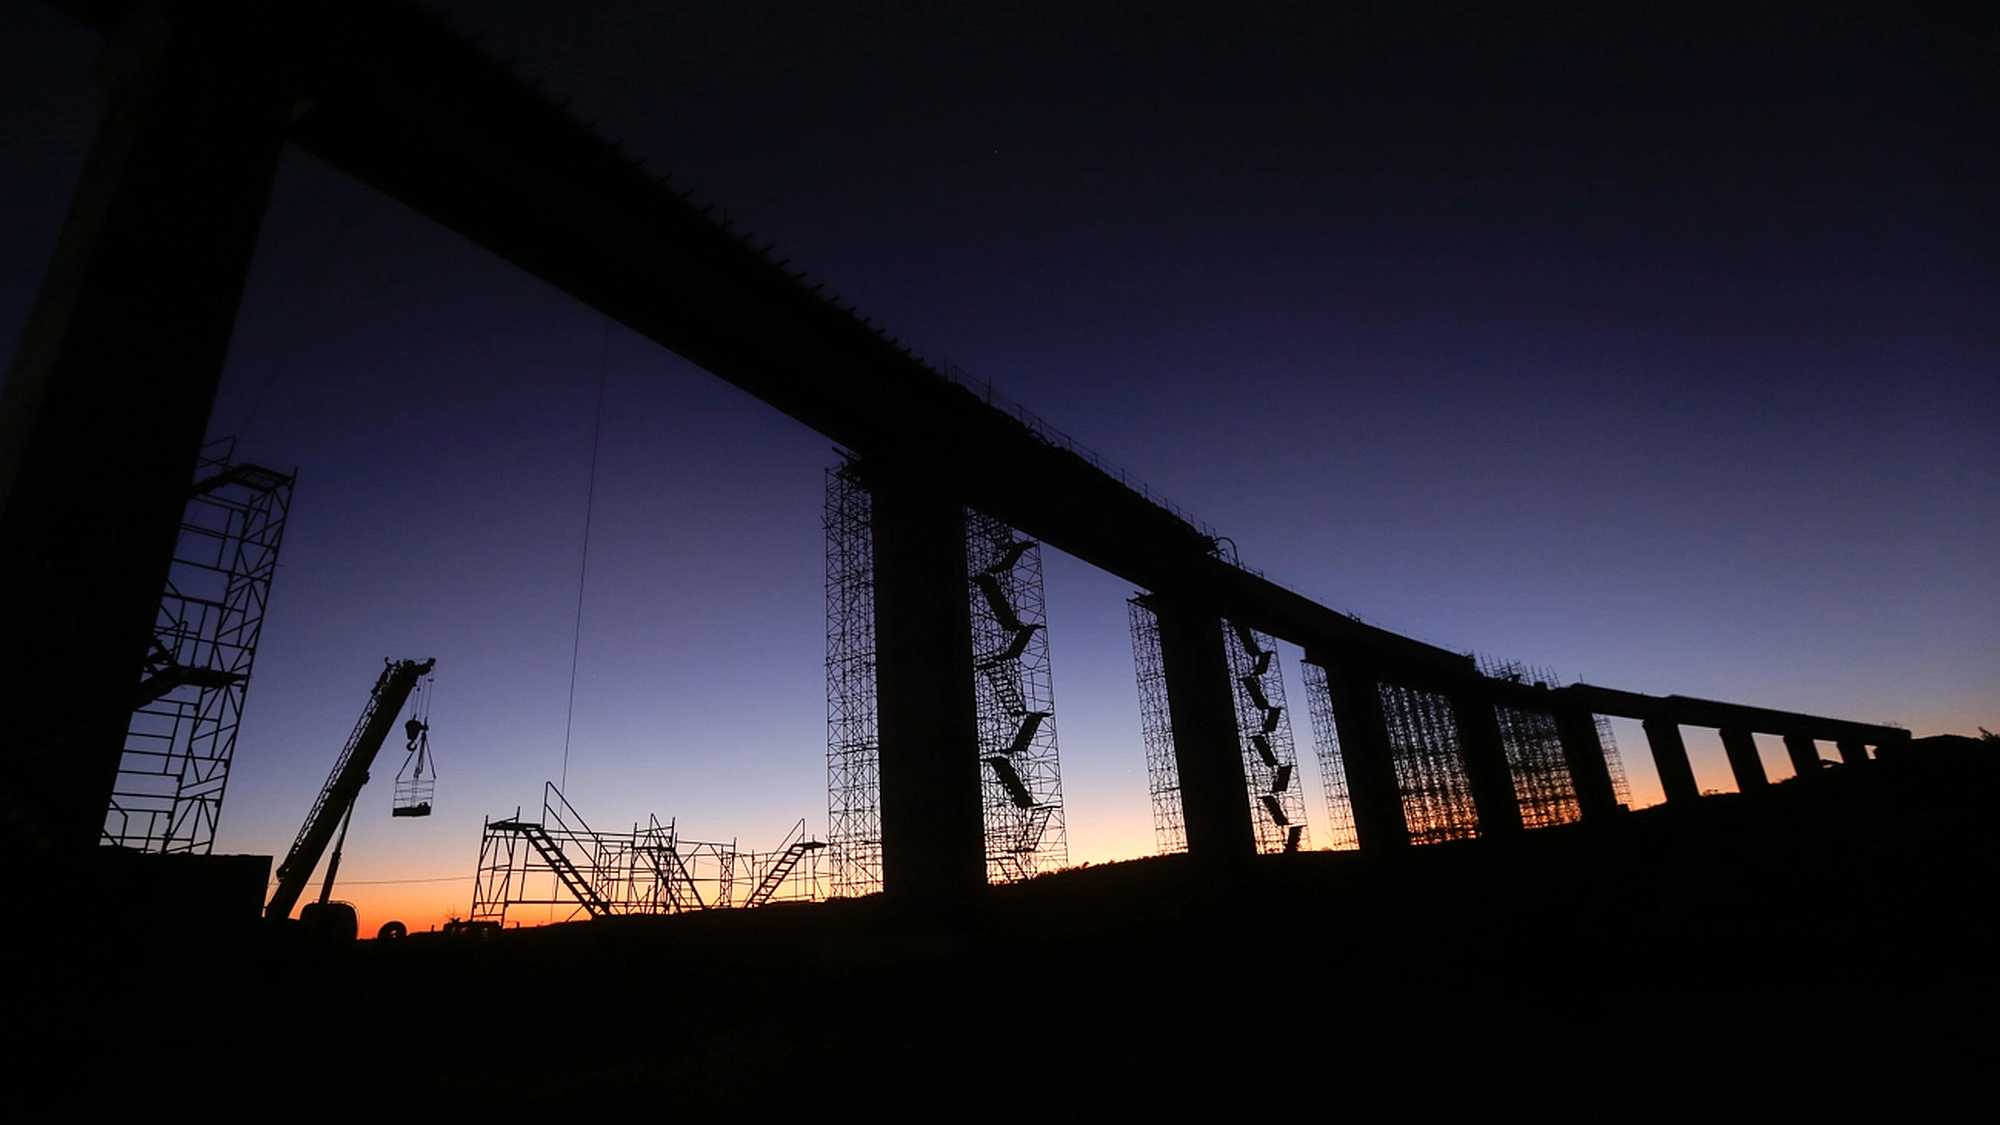 Construction of an elevated section of the FIOL railway line. Image by Rafael Martins.